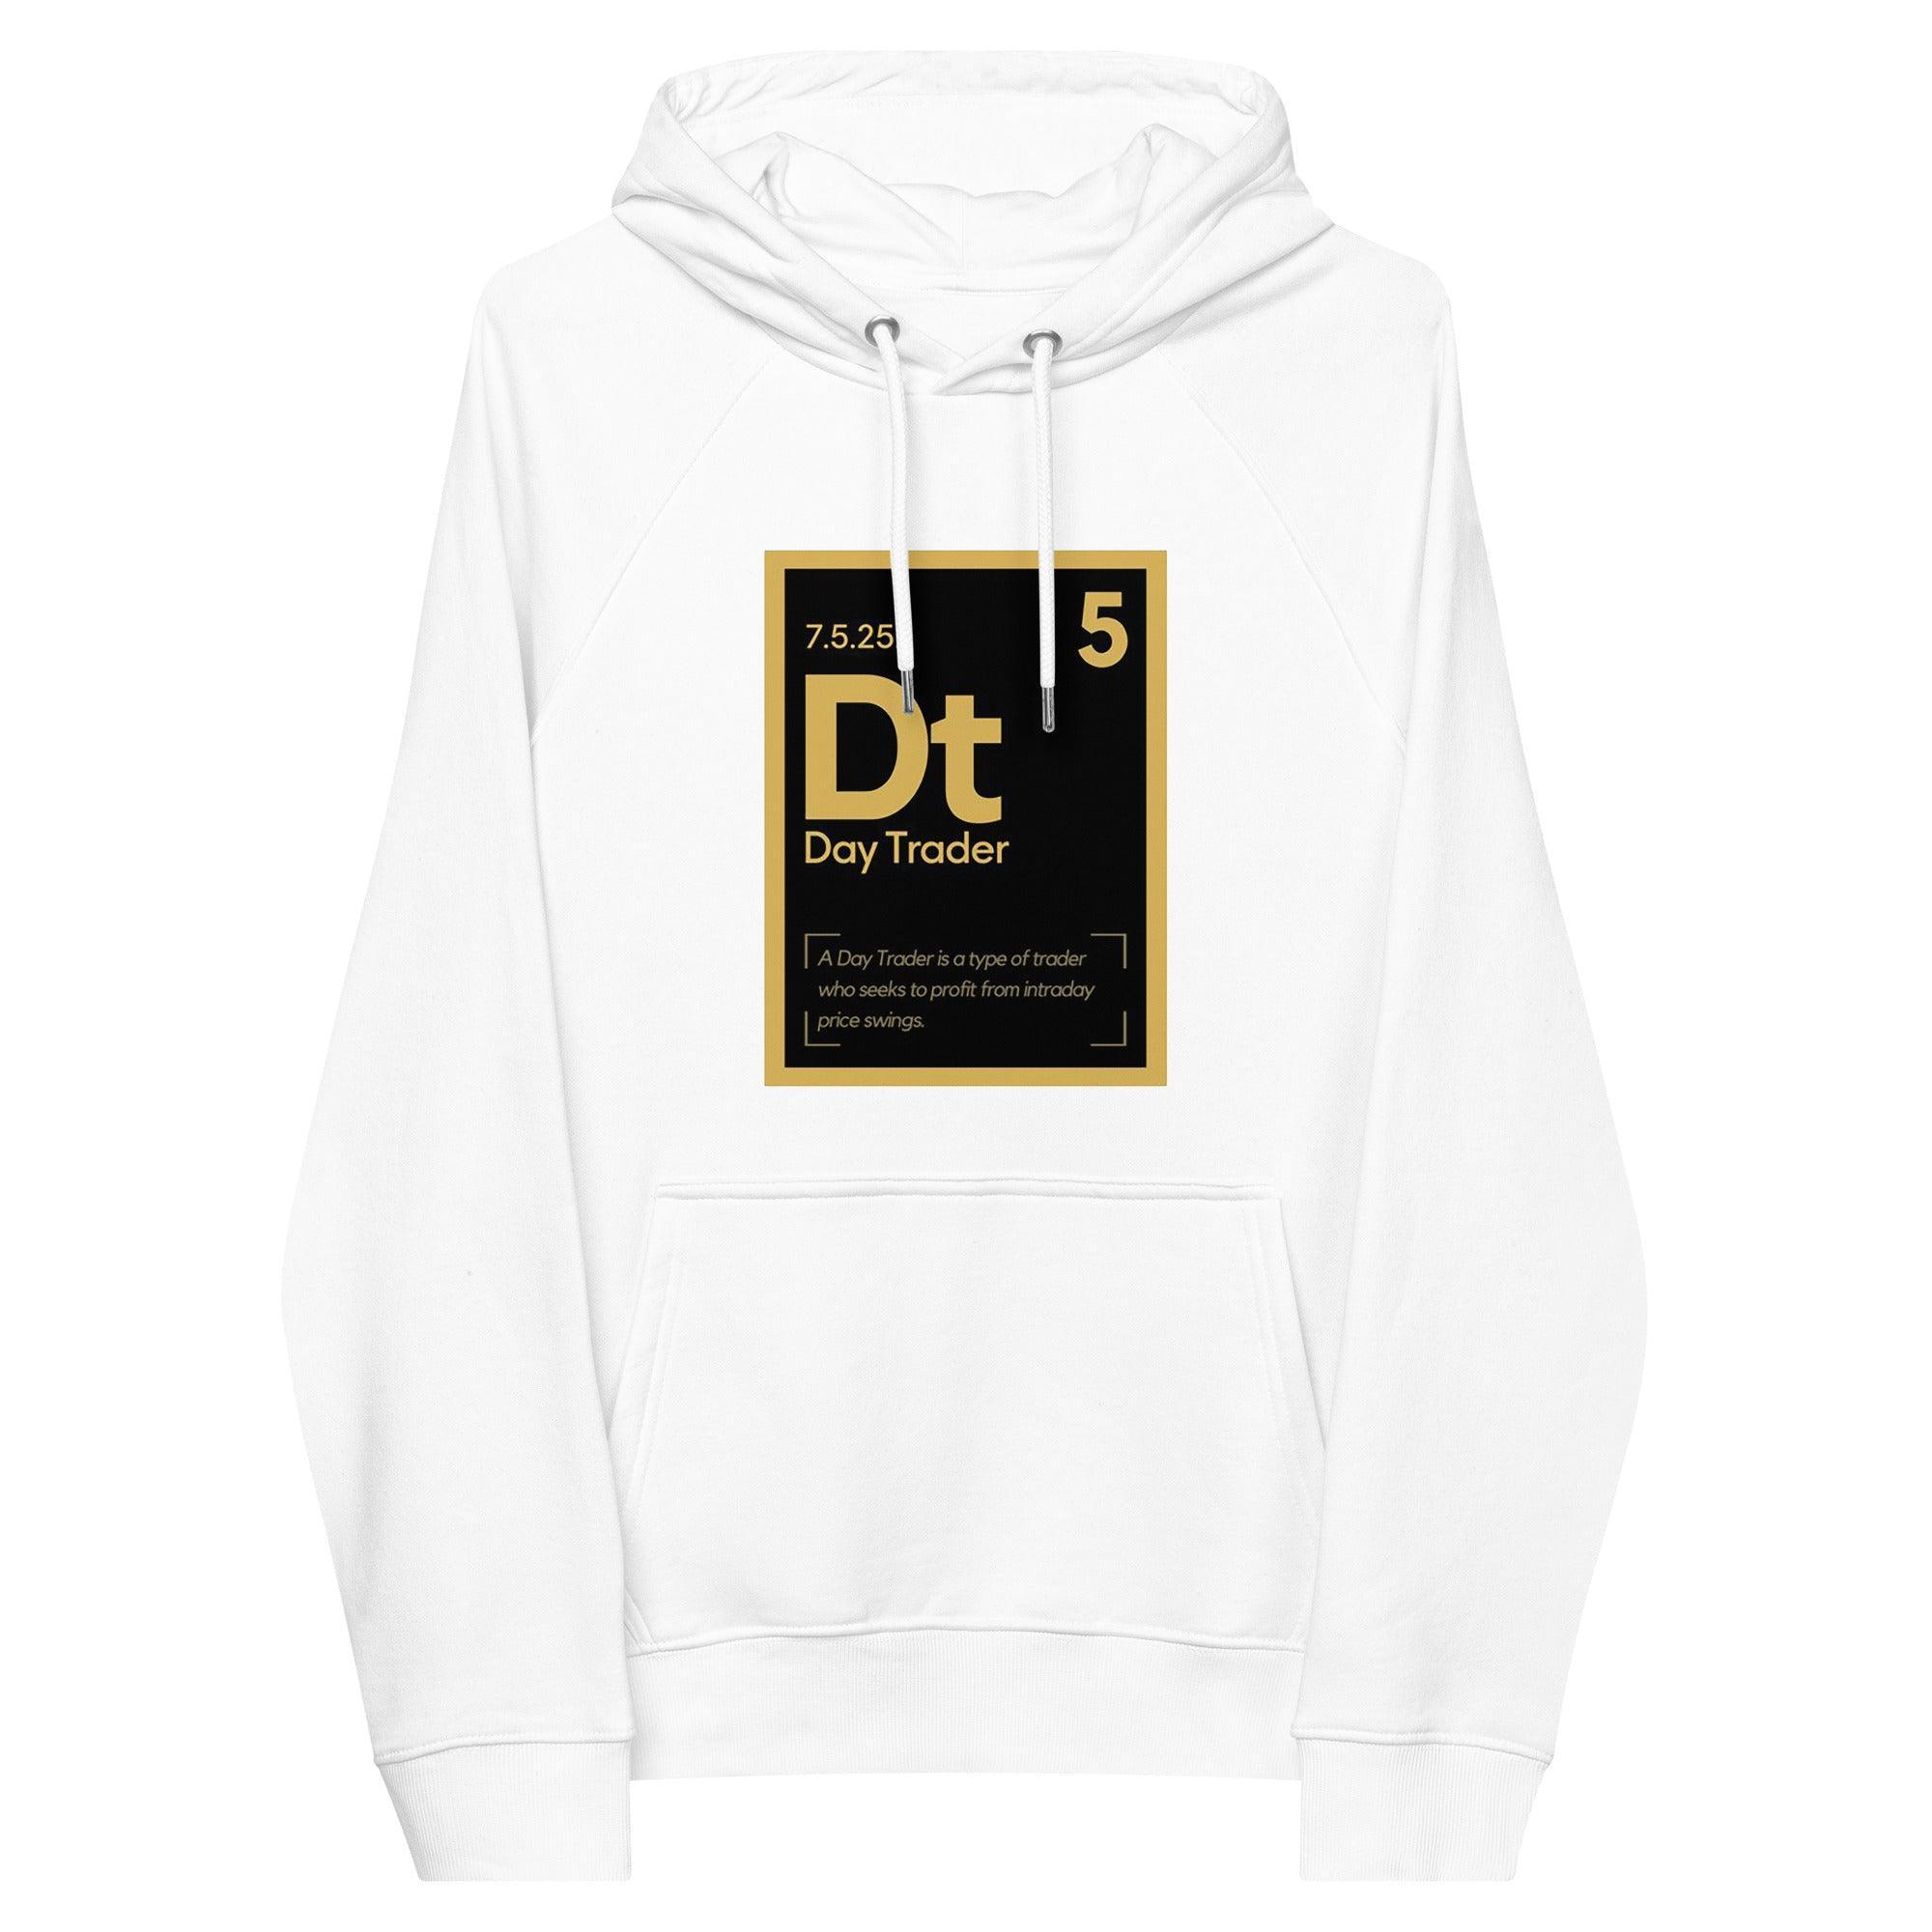 Day Trader Pullover Hoodie - InvestmenTees